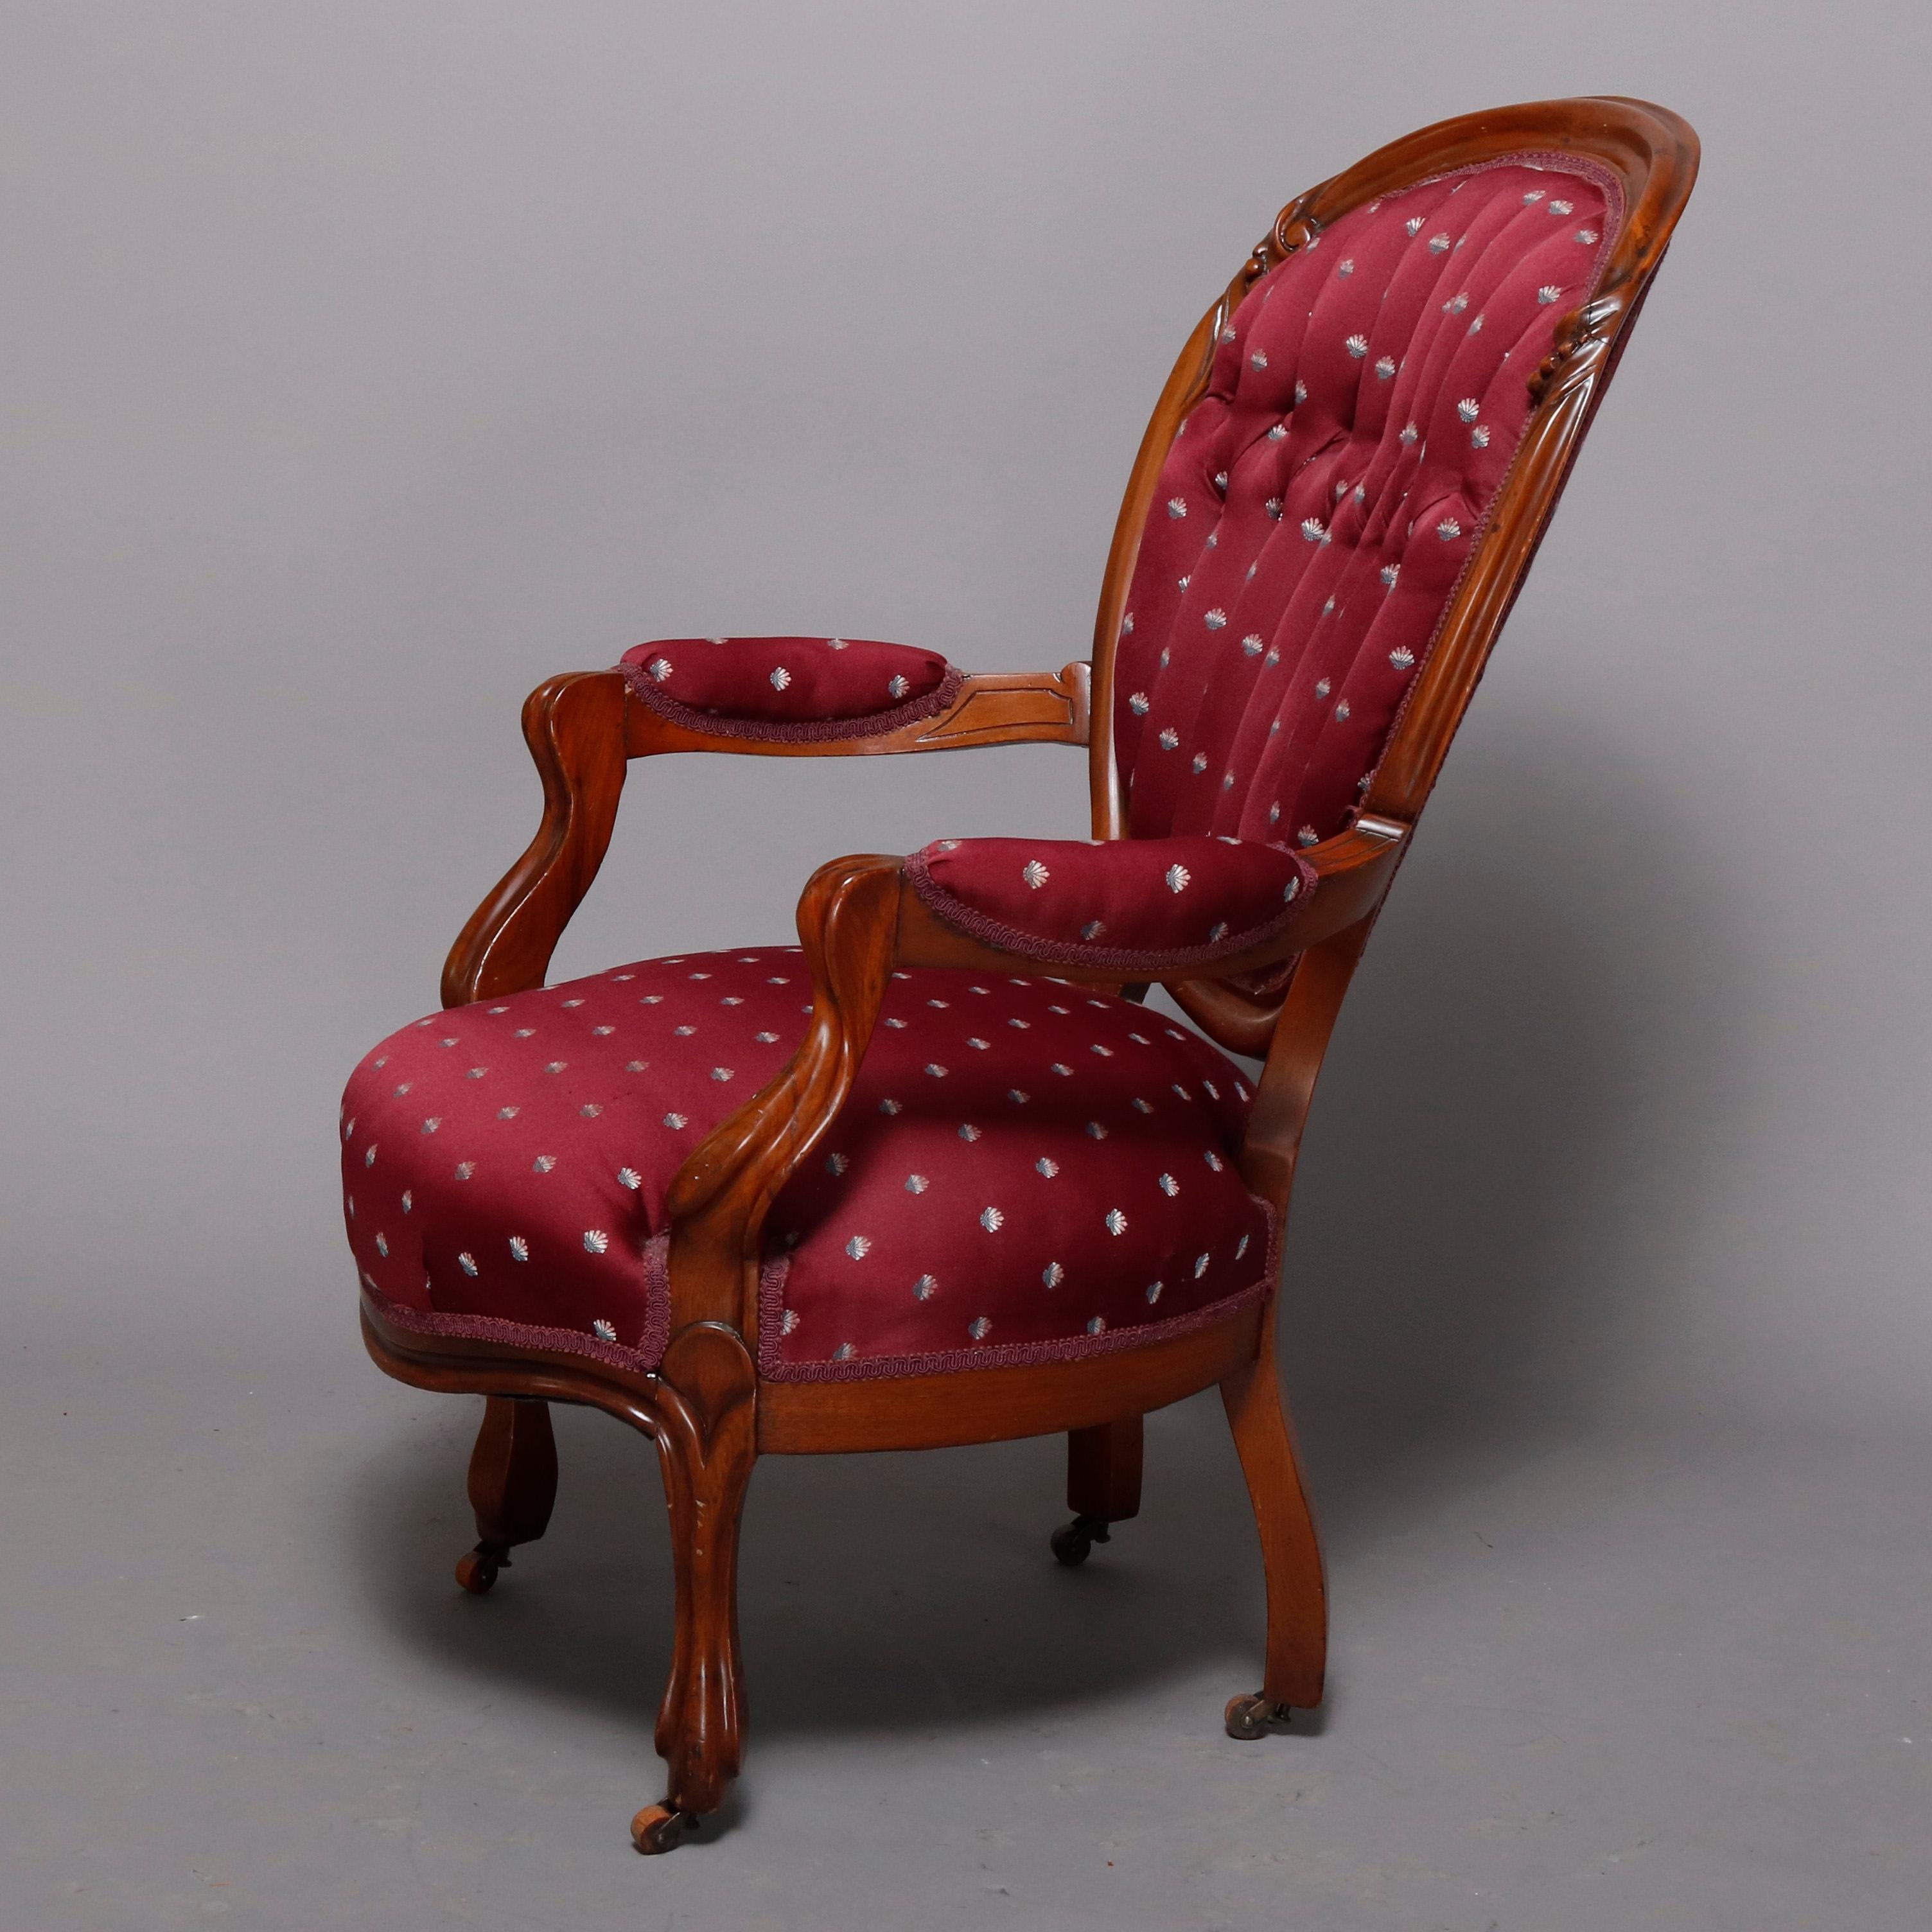 An antique Victorian parlor armchair features finger carved walnut frame with medallion back having button back upholstery, covered arms and seat, raised on cabriole legs terminating in casters, circa 1880

Measures: 40